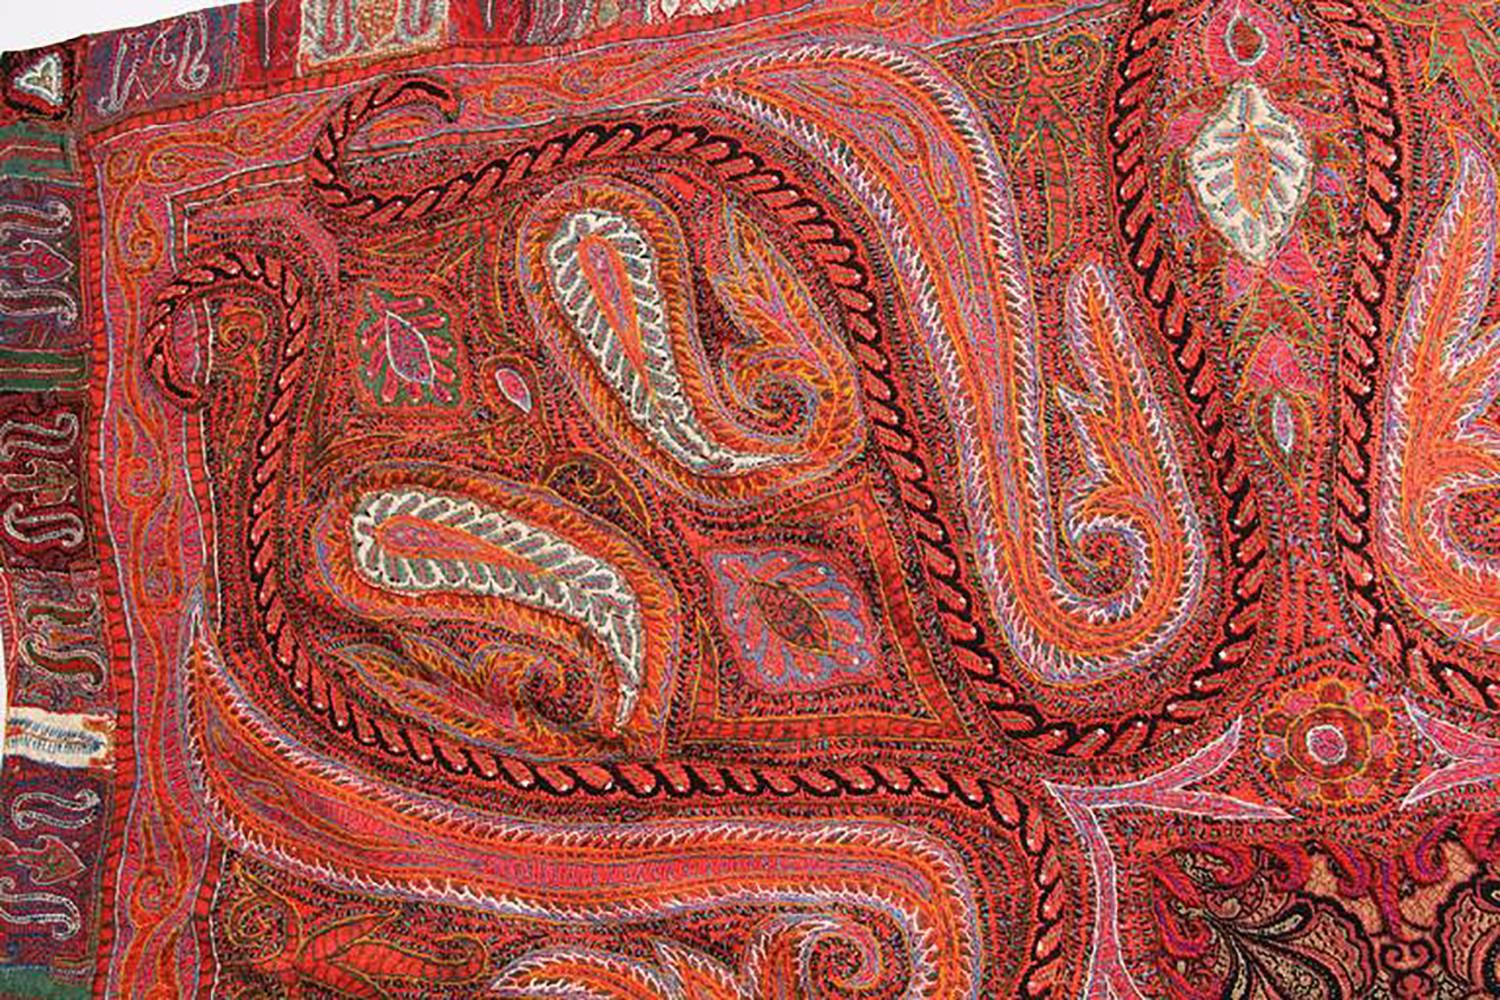 Brown Antique Indian Embroidered Paisley Shawl Blanket